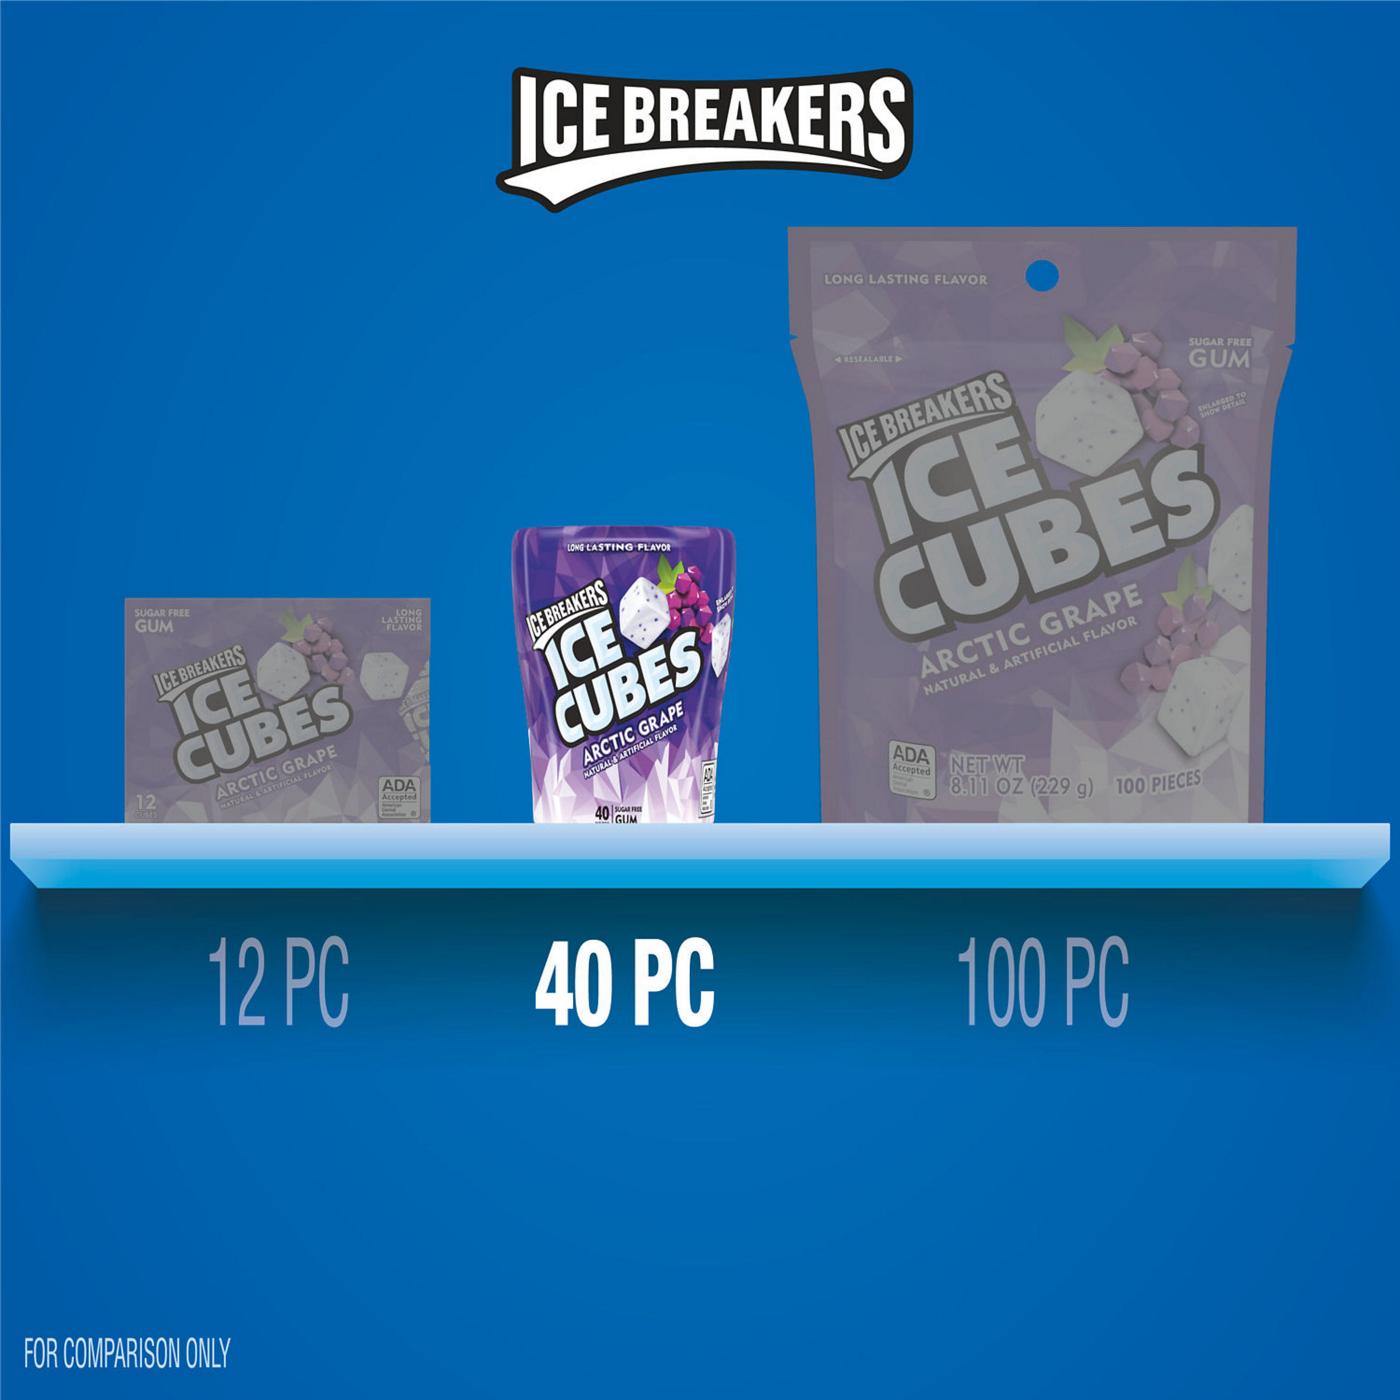 Ice Breakers Ice Cubes Arctic Grape Sugar Free Chewing Gum; image 3 of 7